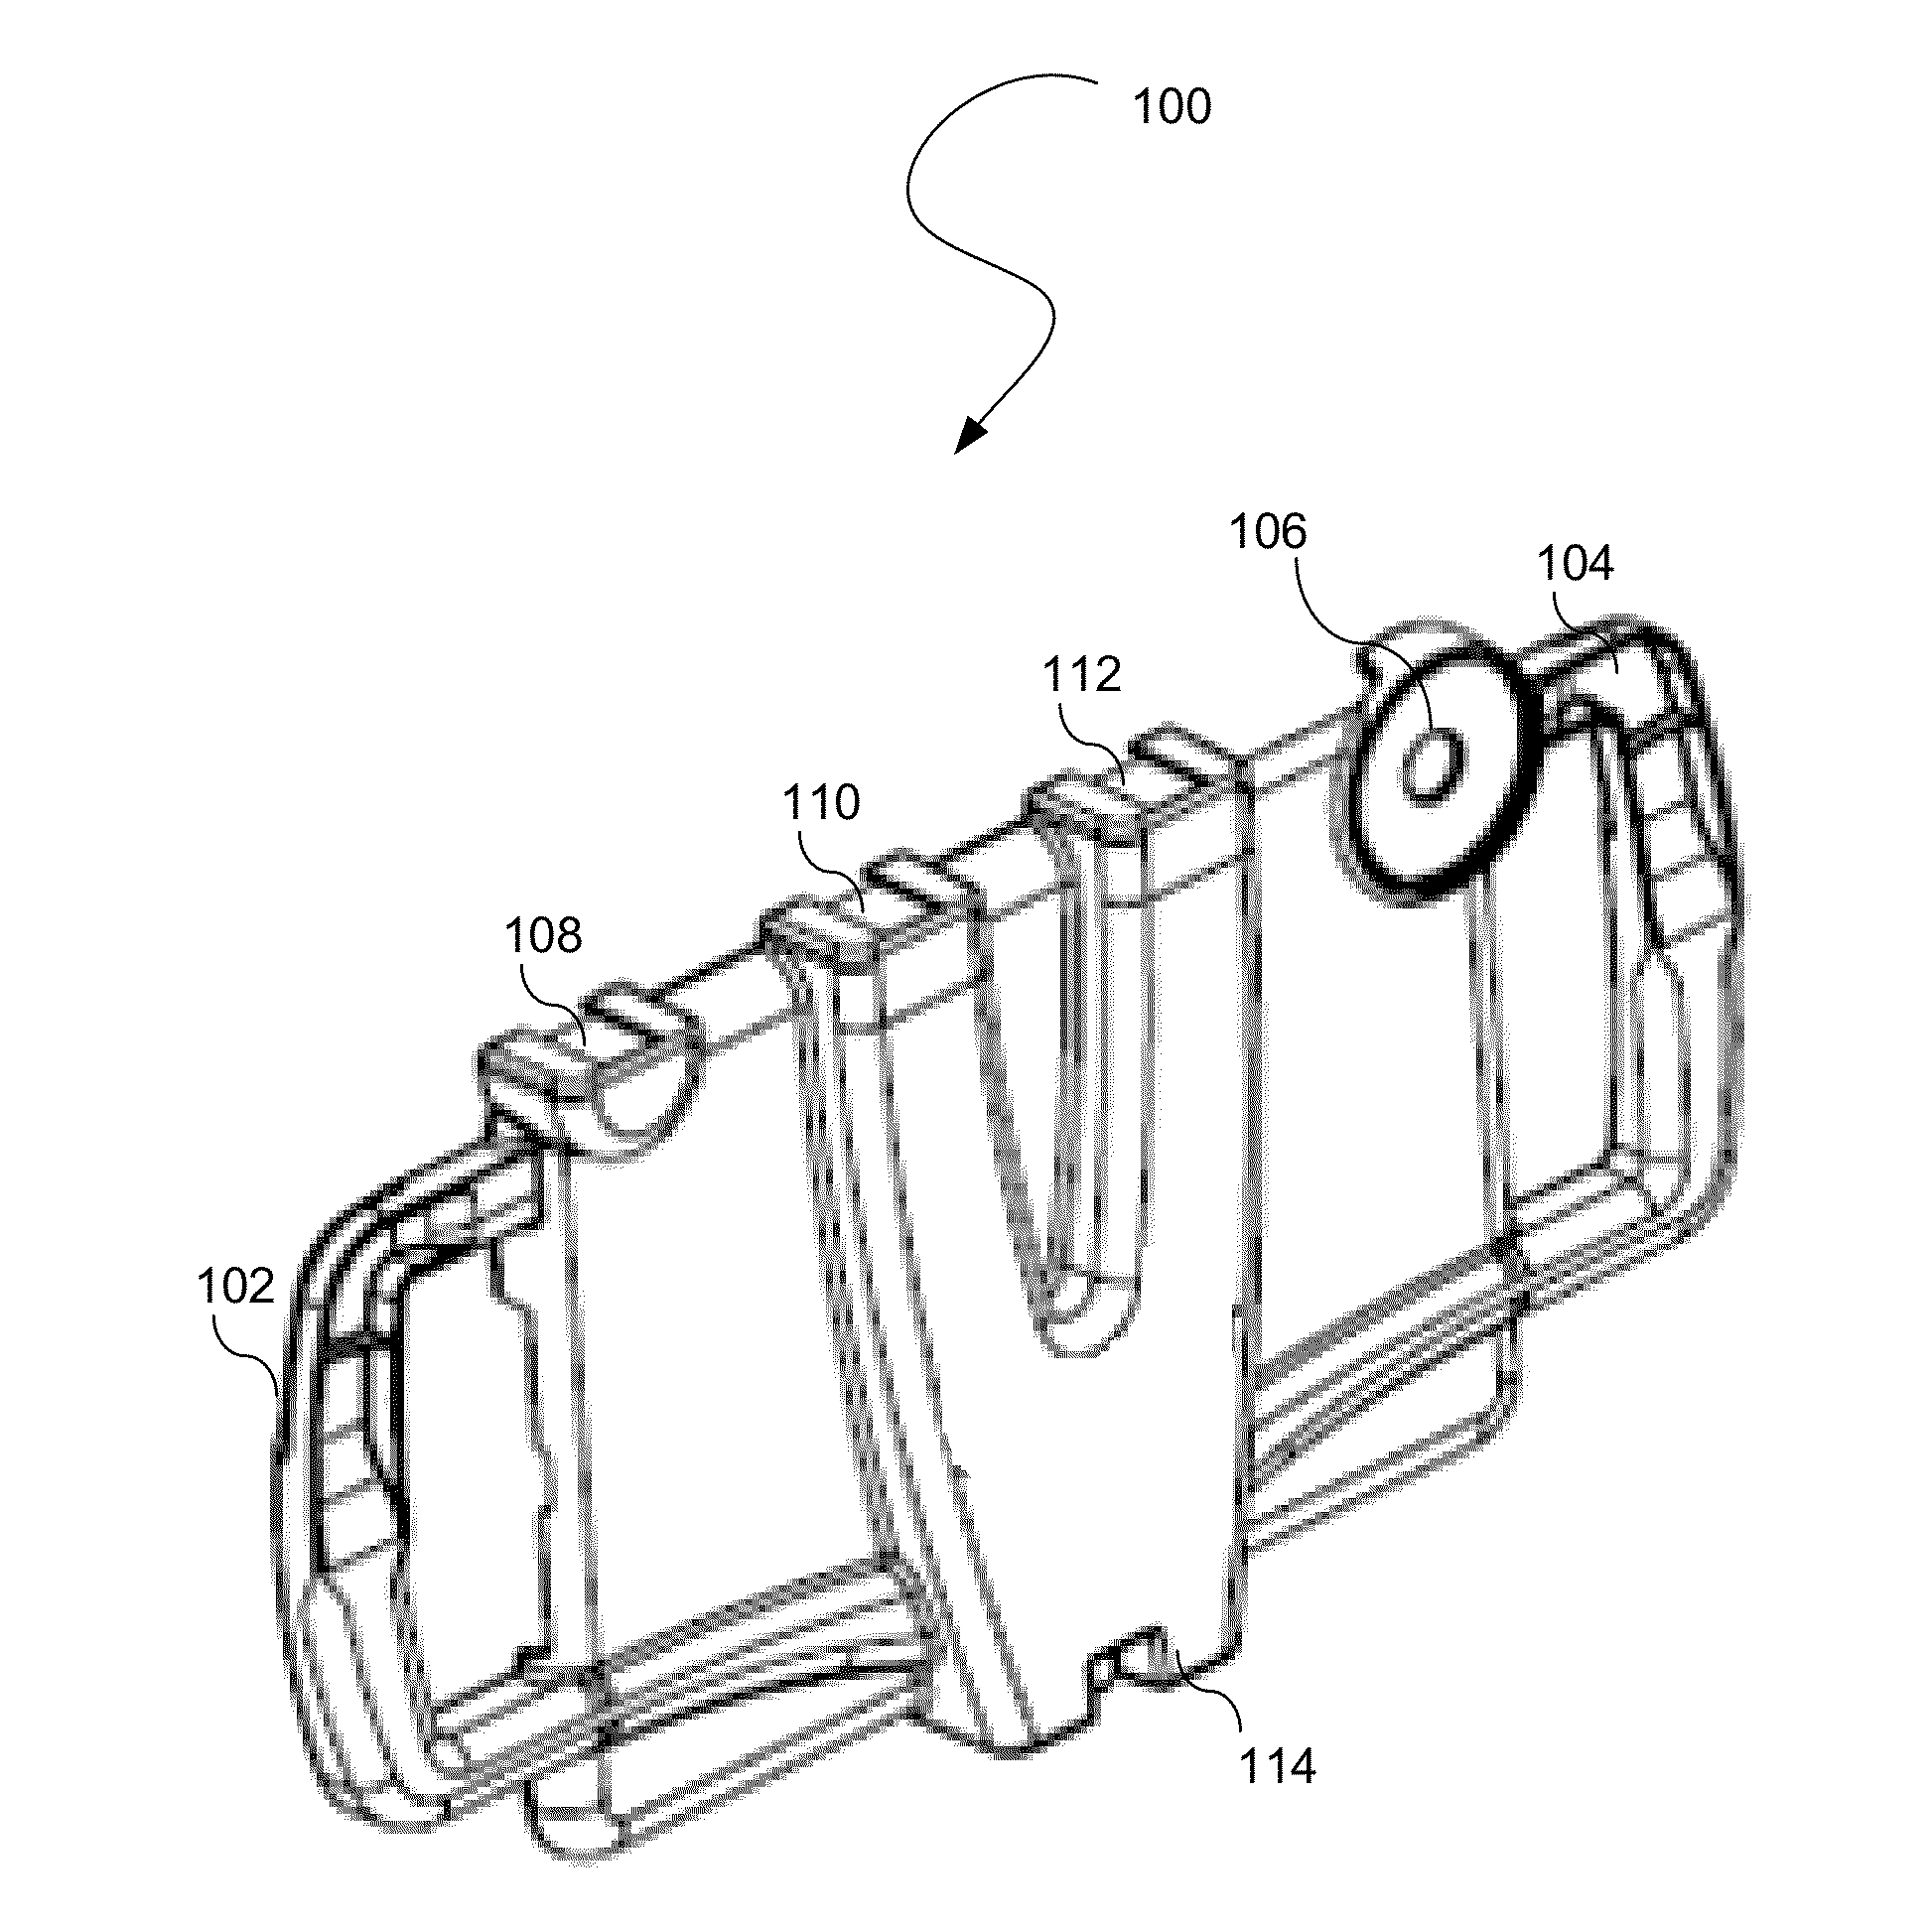 Receptacle for an image capture computing device